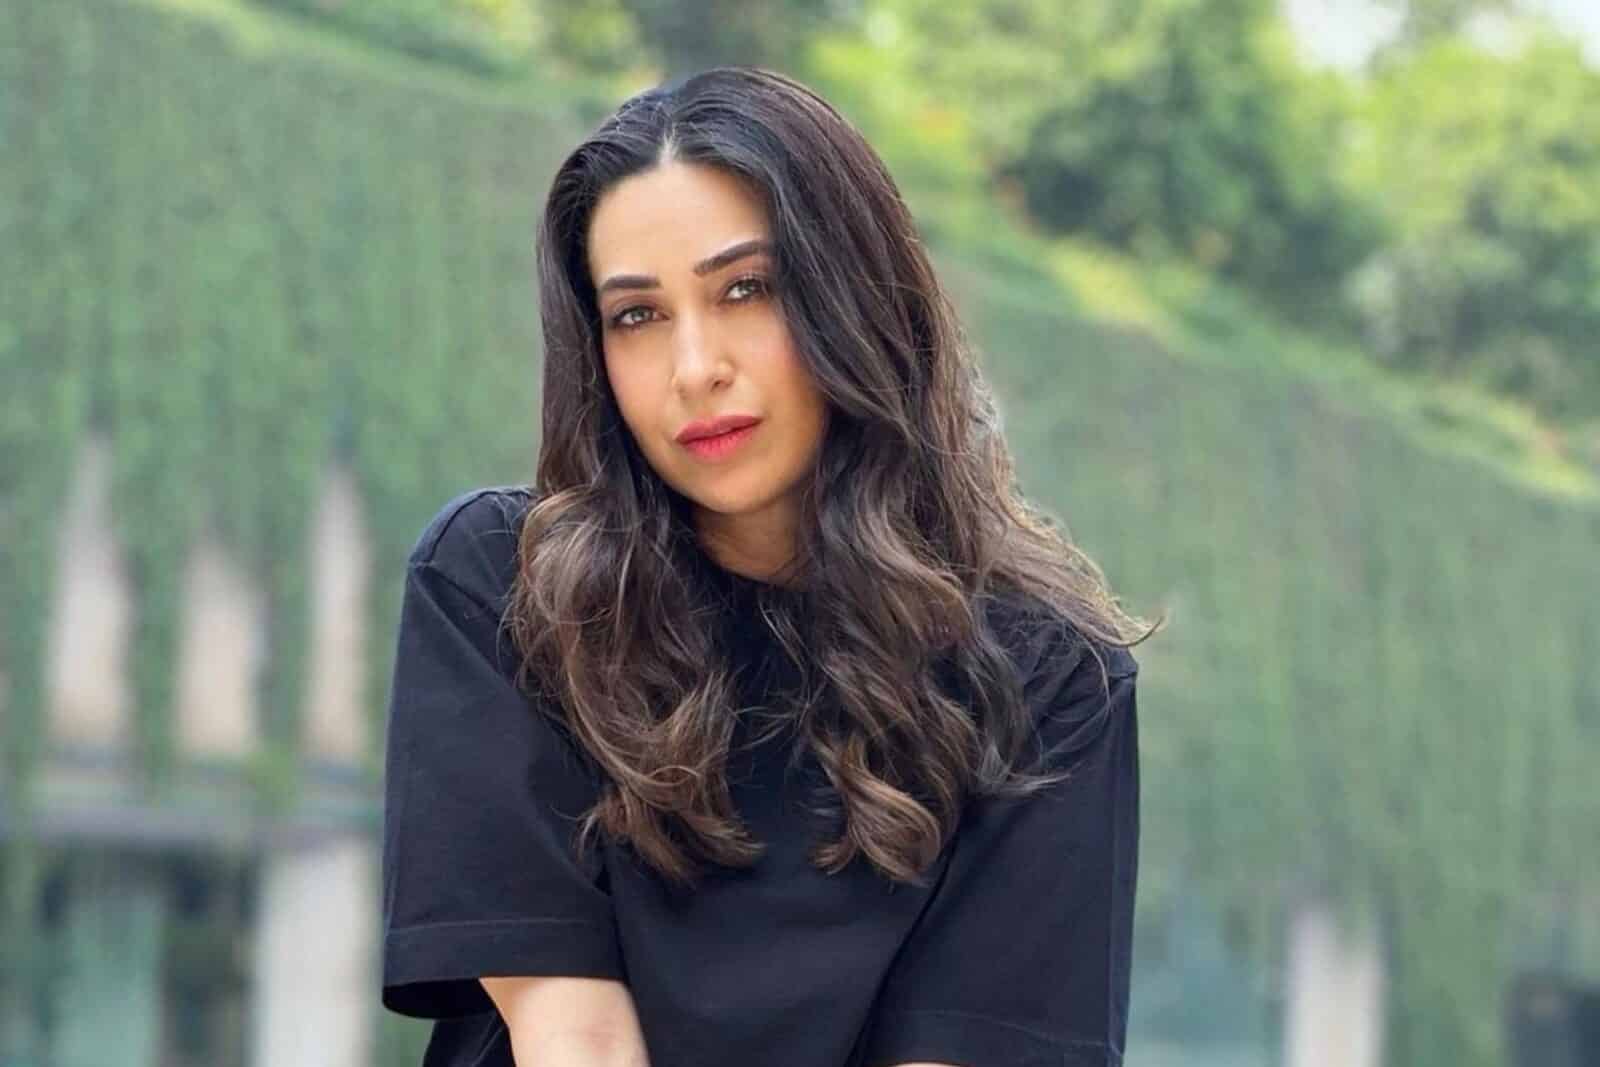 Karisma Kapoor’s Bio: From Stardom to Fitness, She Conquers It All